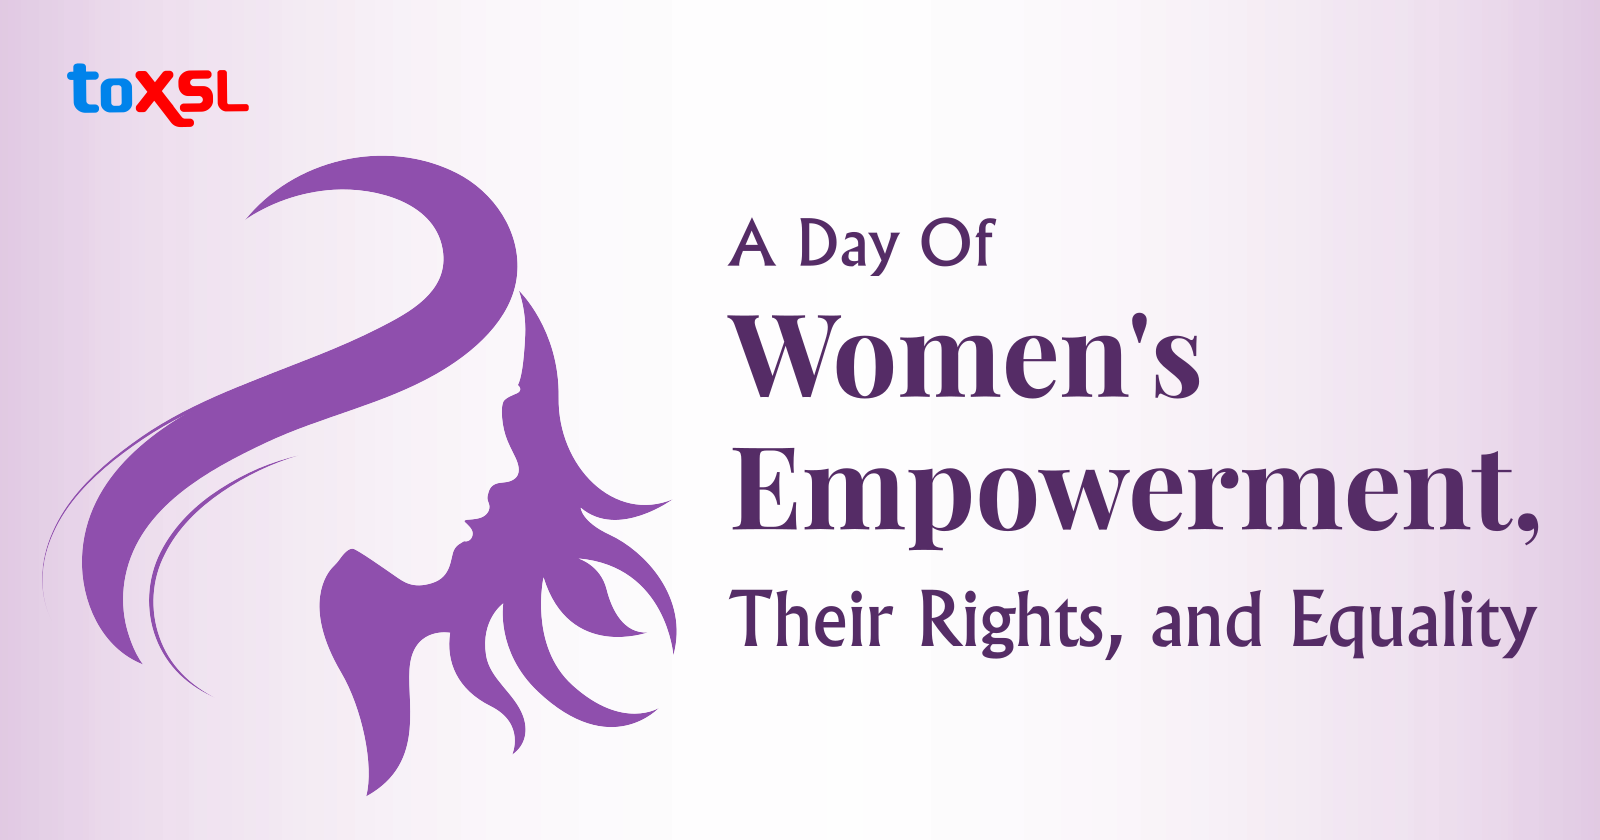 A Day of Women’s Empowerment, their Rights and Equality